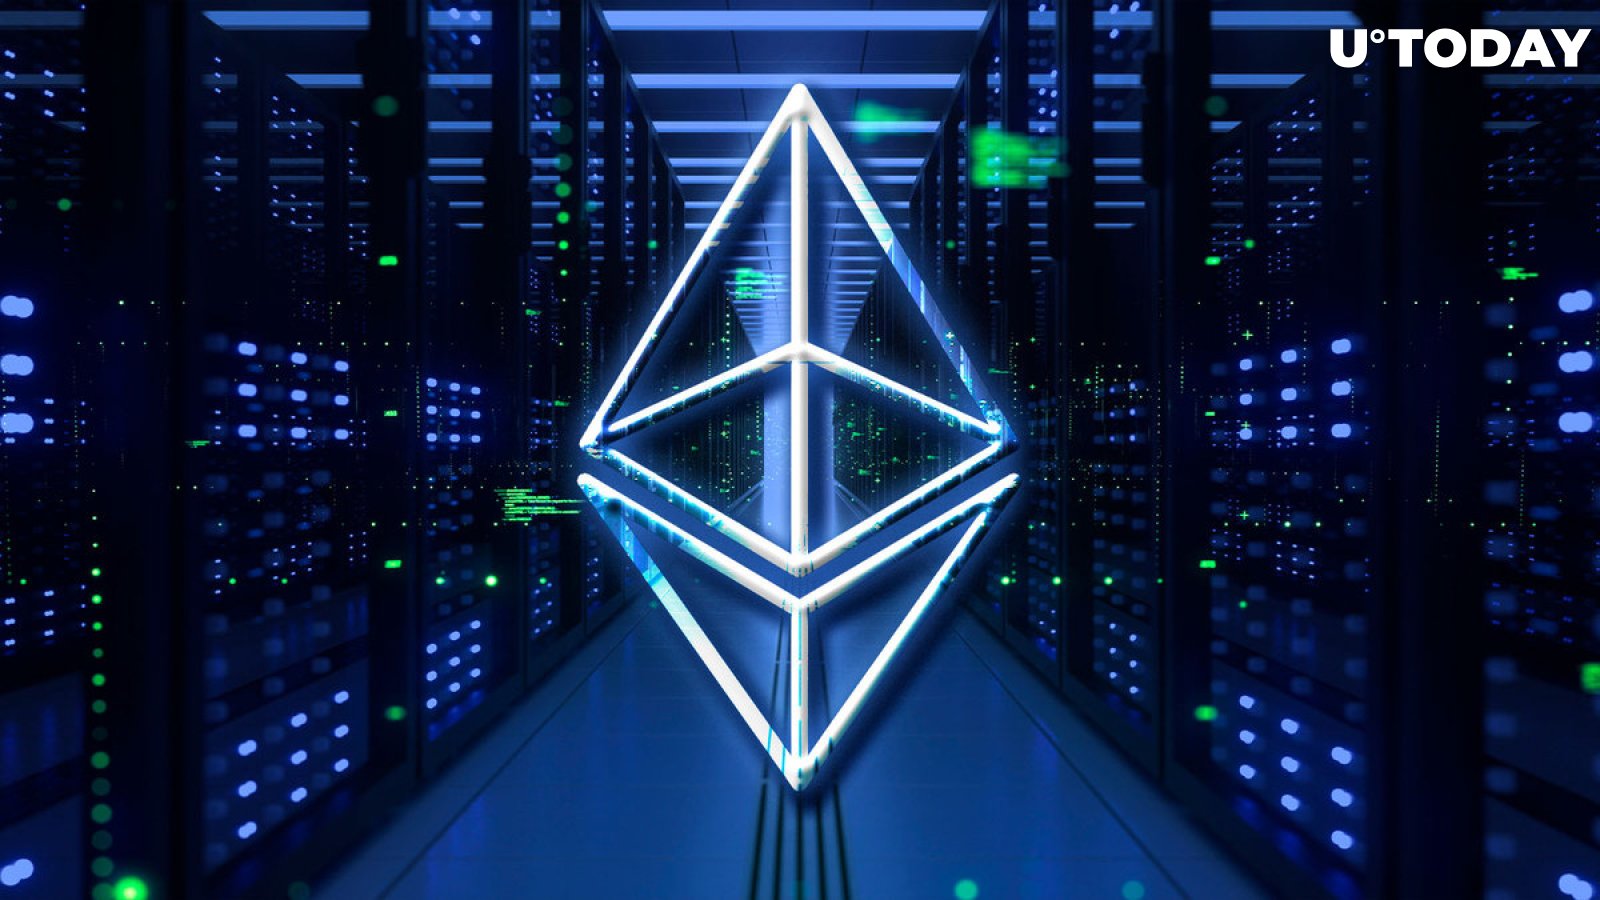 Ethereum Mining Firm Launches ETC Mining Software; Weekly ETC Price Surges 54%